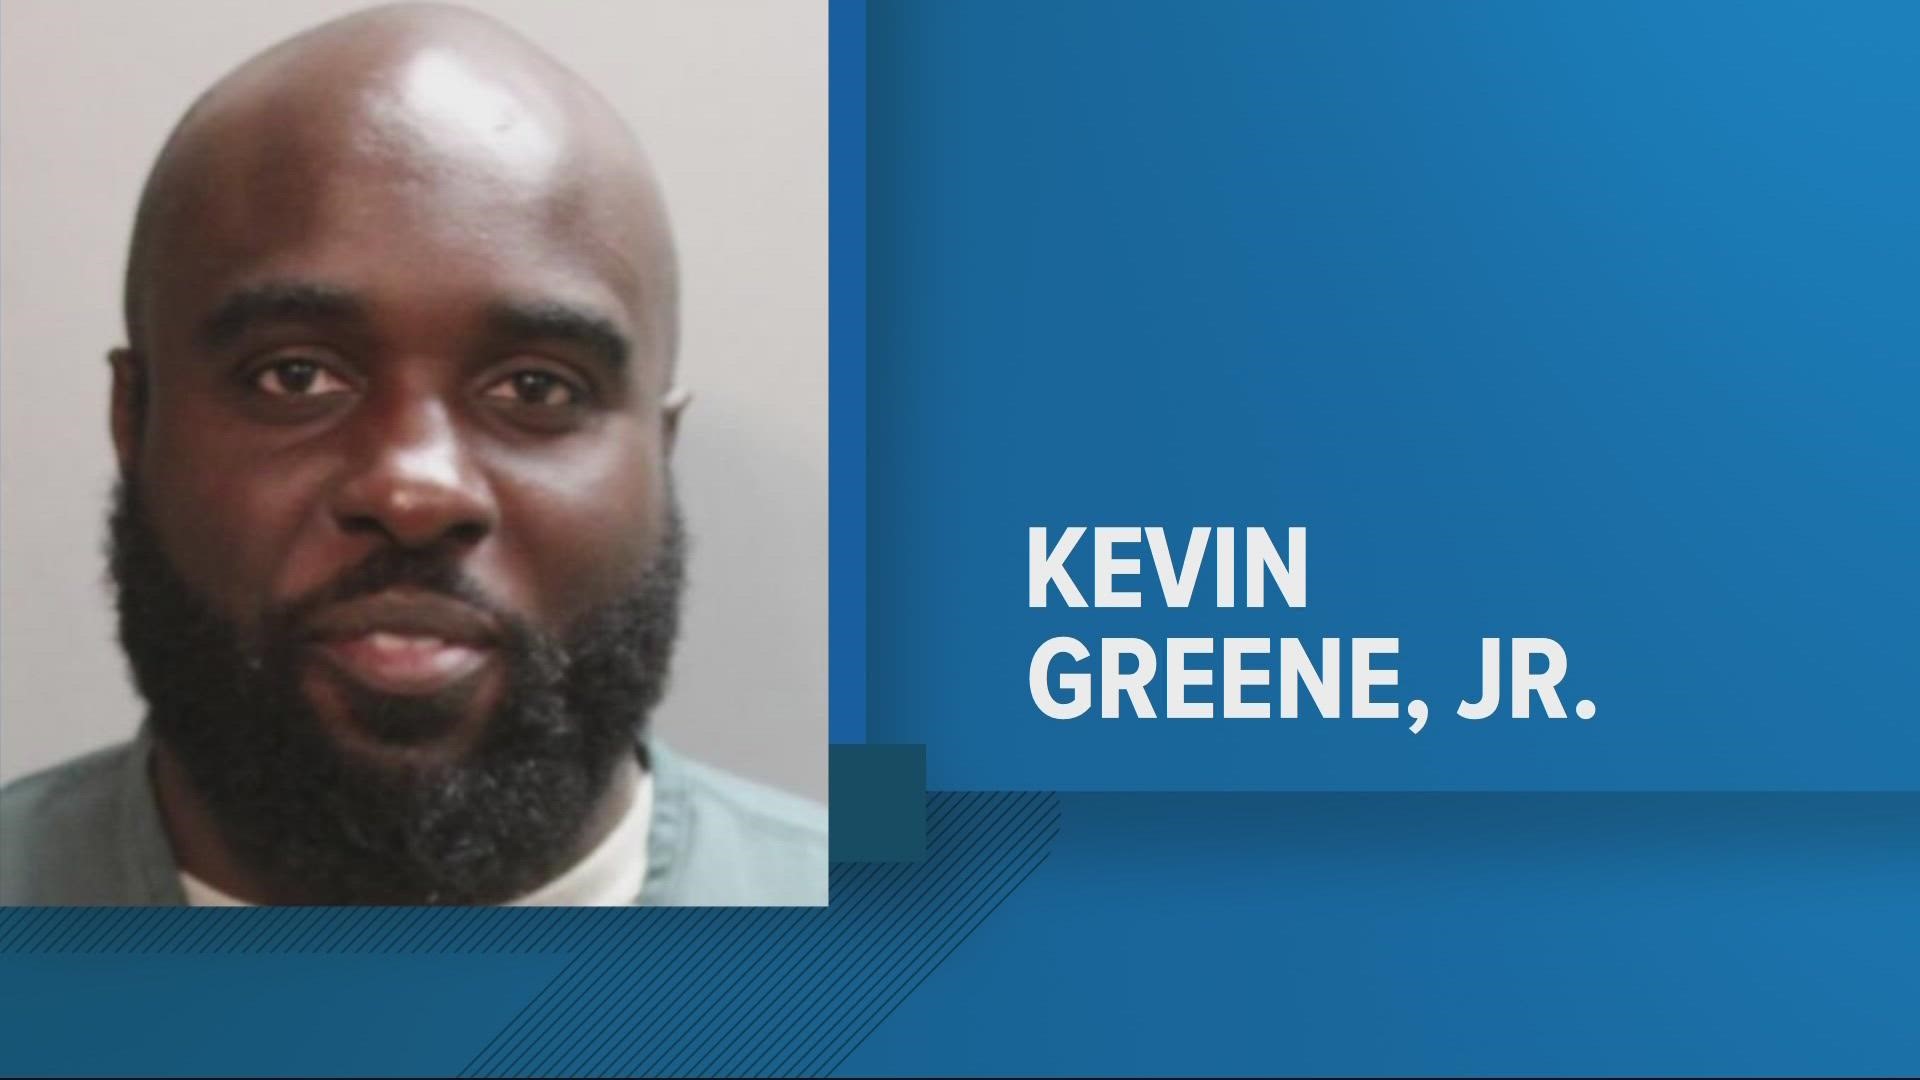 An arrest report from the Jacksonville Sheriff's Office indicates that Greene and a student got into an altercation about the student skipping class.